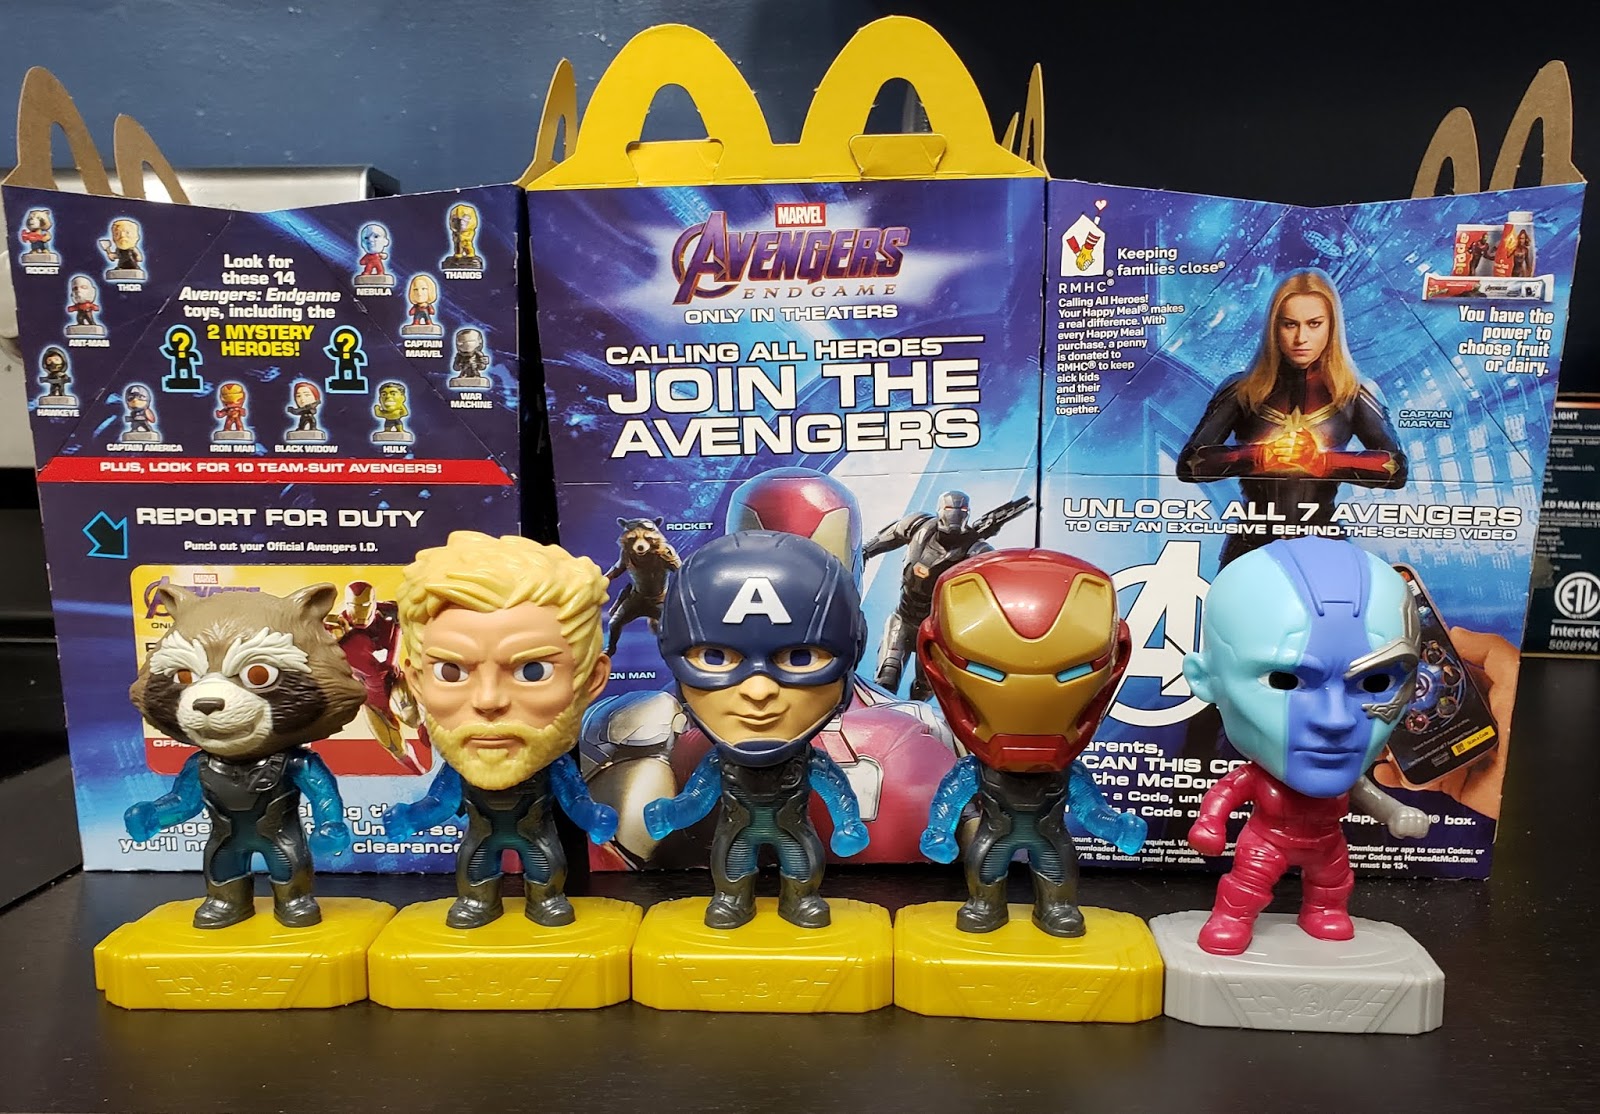 McDONALDS HAPPY MEAL TOYS  AVENGERS END GAME CAP AMERICA  HAPPY MEAL BOX